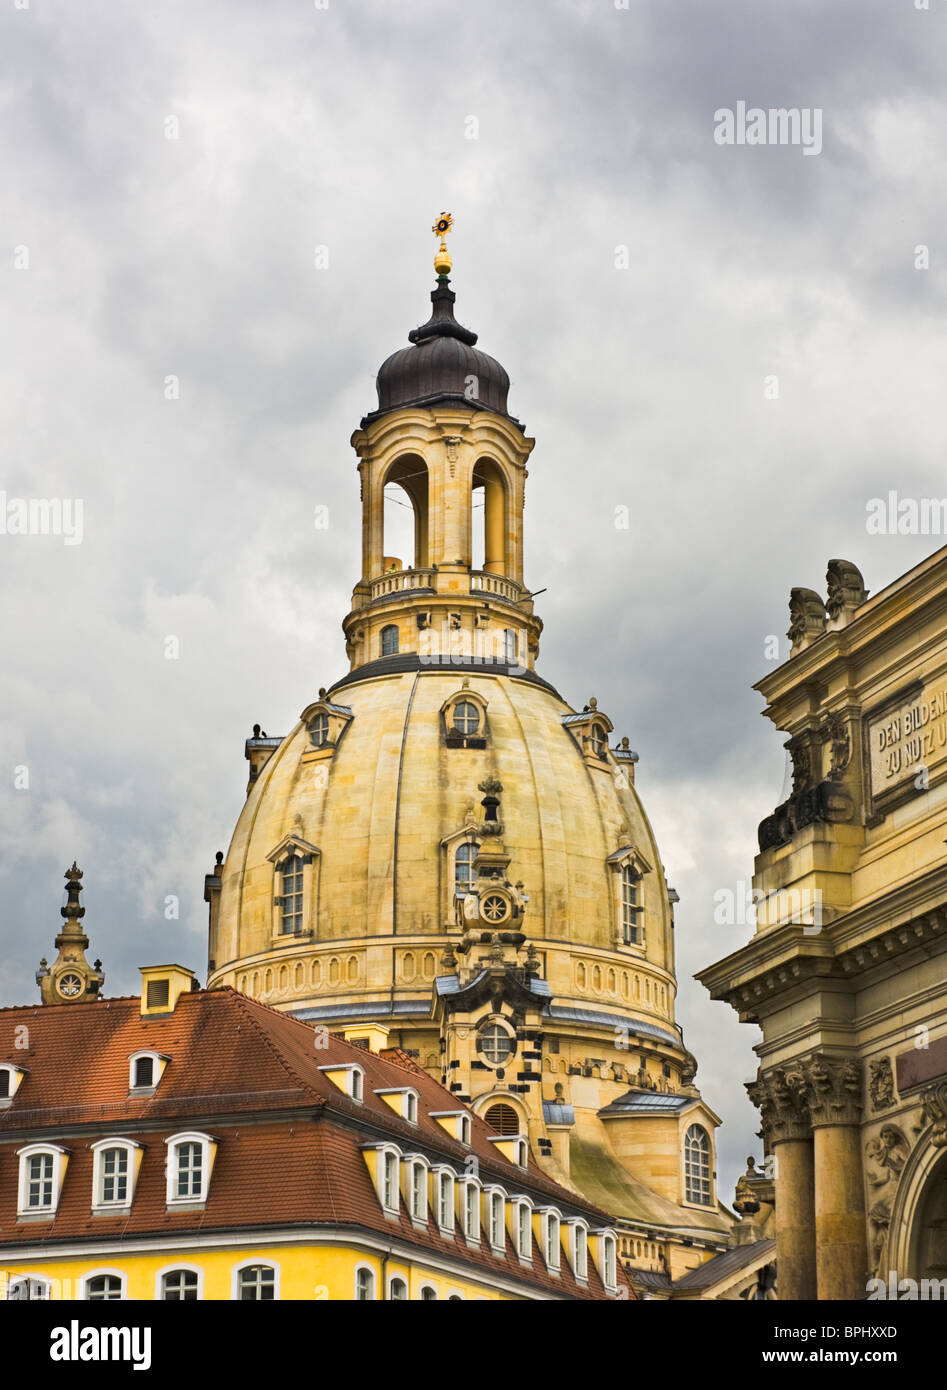 Dome of the Frauenkirche Dresden framed by surrounding buildings and against gray skies Stock Photo